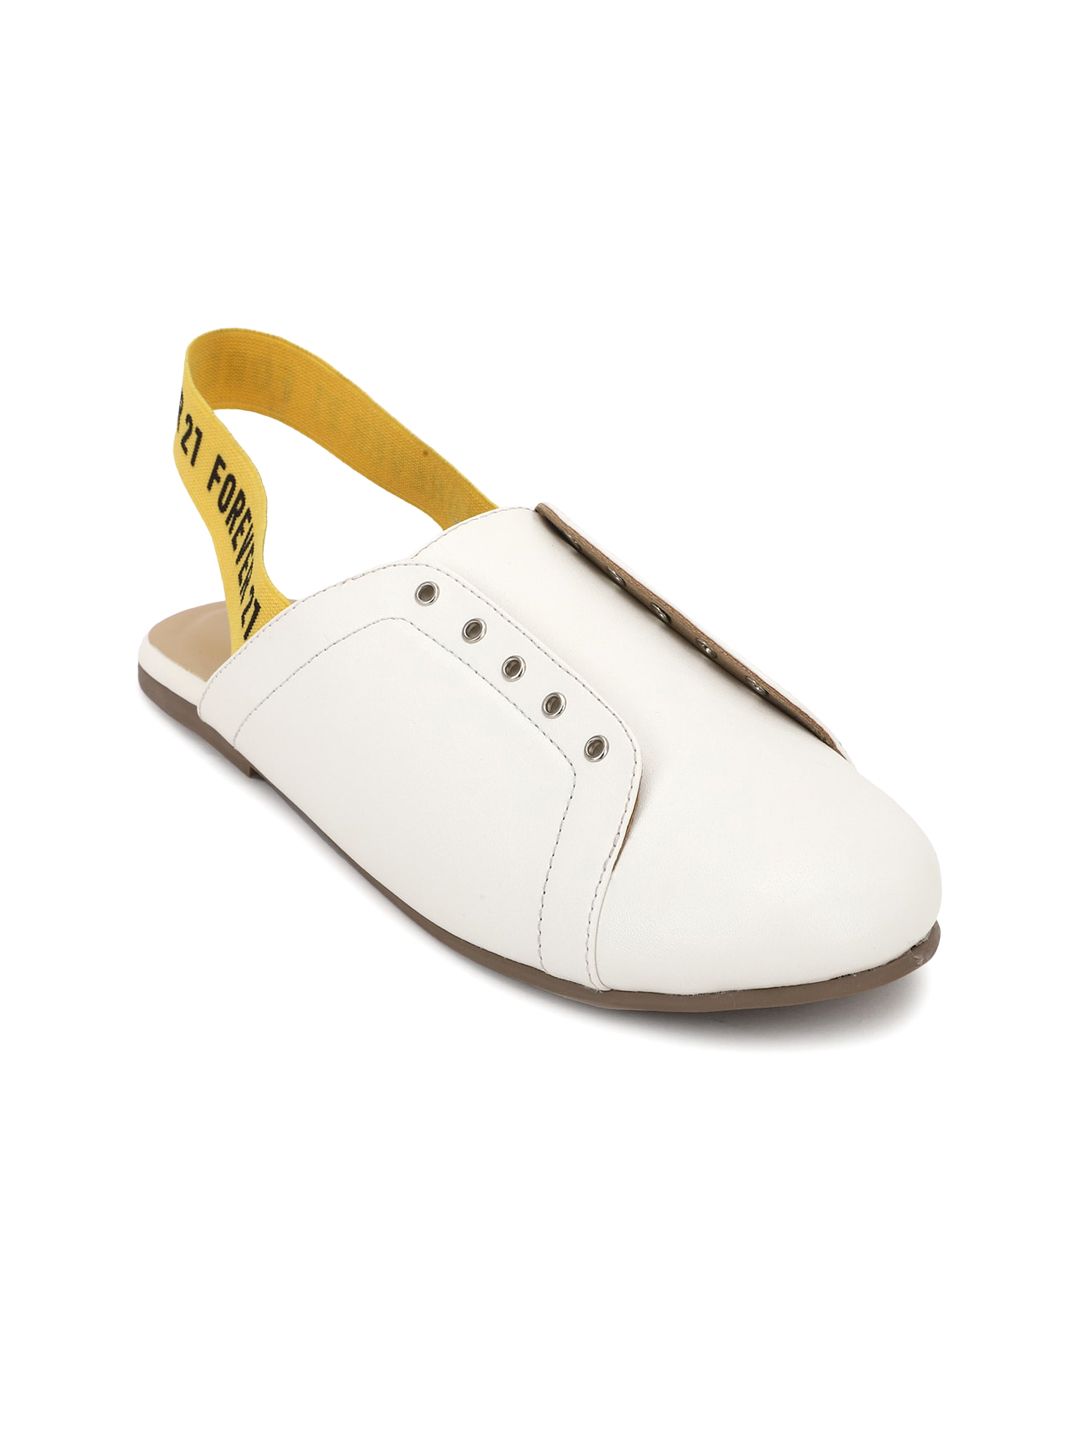 FOREVER 21 Women White Mules Flats Price in India